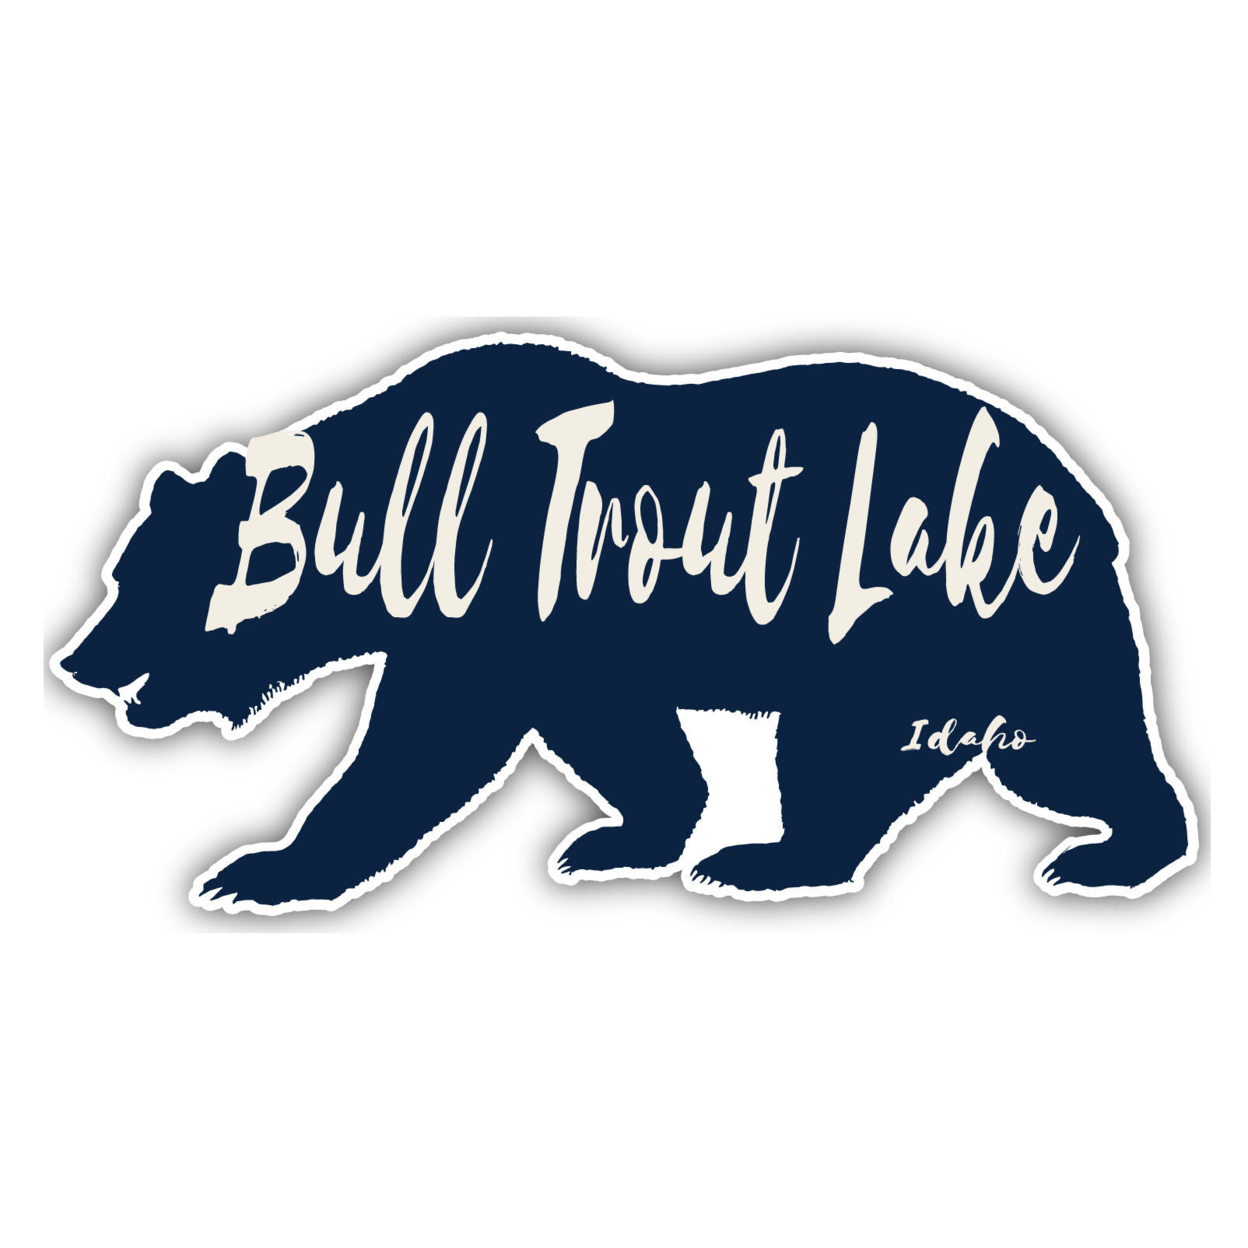 Bull Trout Lake Idaho Souvenir Decorative Stickers (Choose Theme And Size) - 4-Pack, 12-Inch, Bear